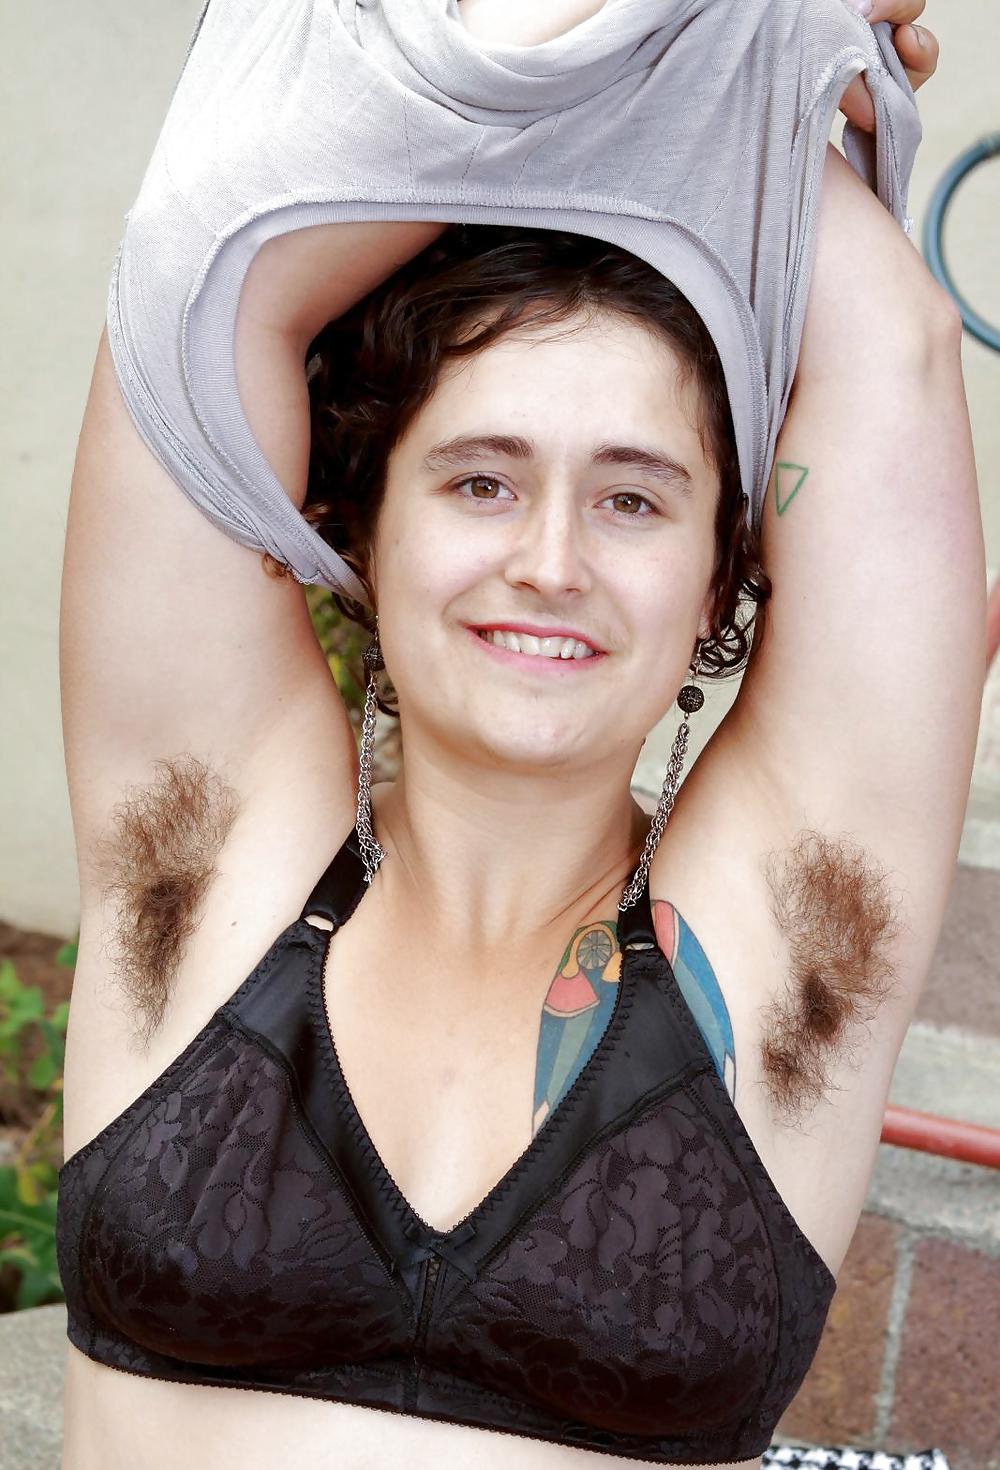 Girls with hairy, unshaven armpits U to Z #23683421